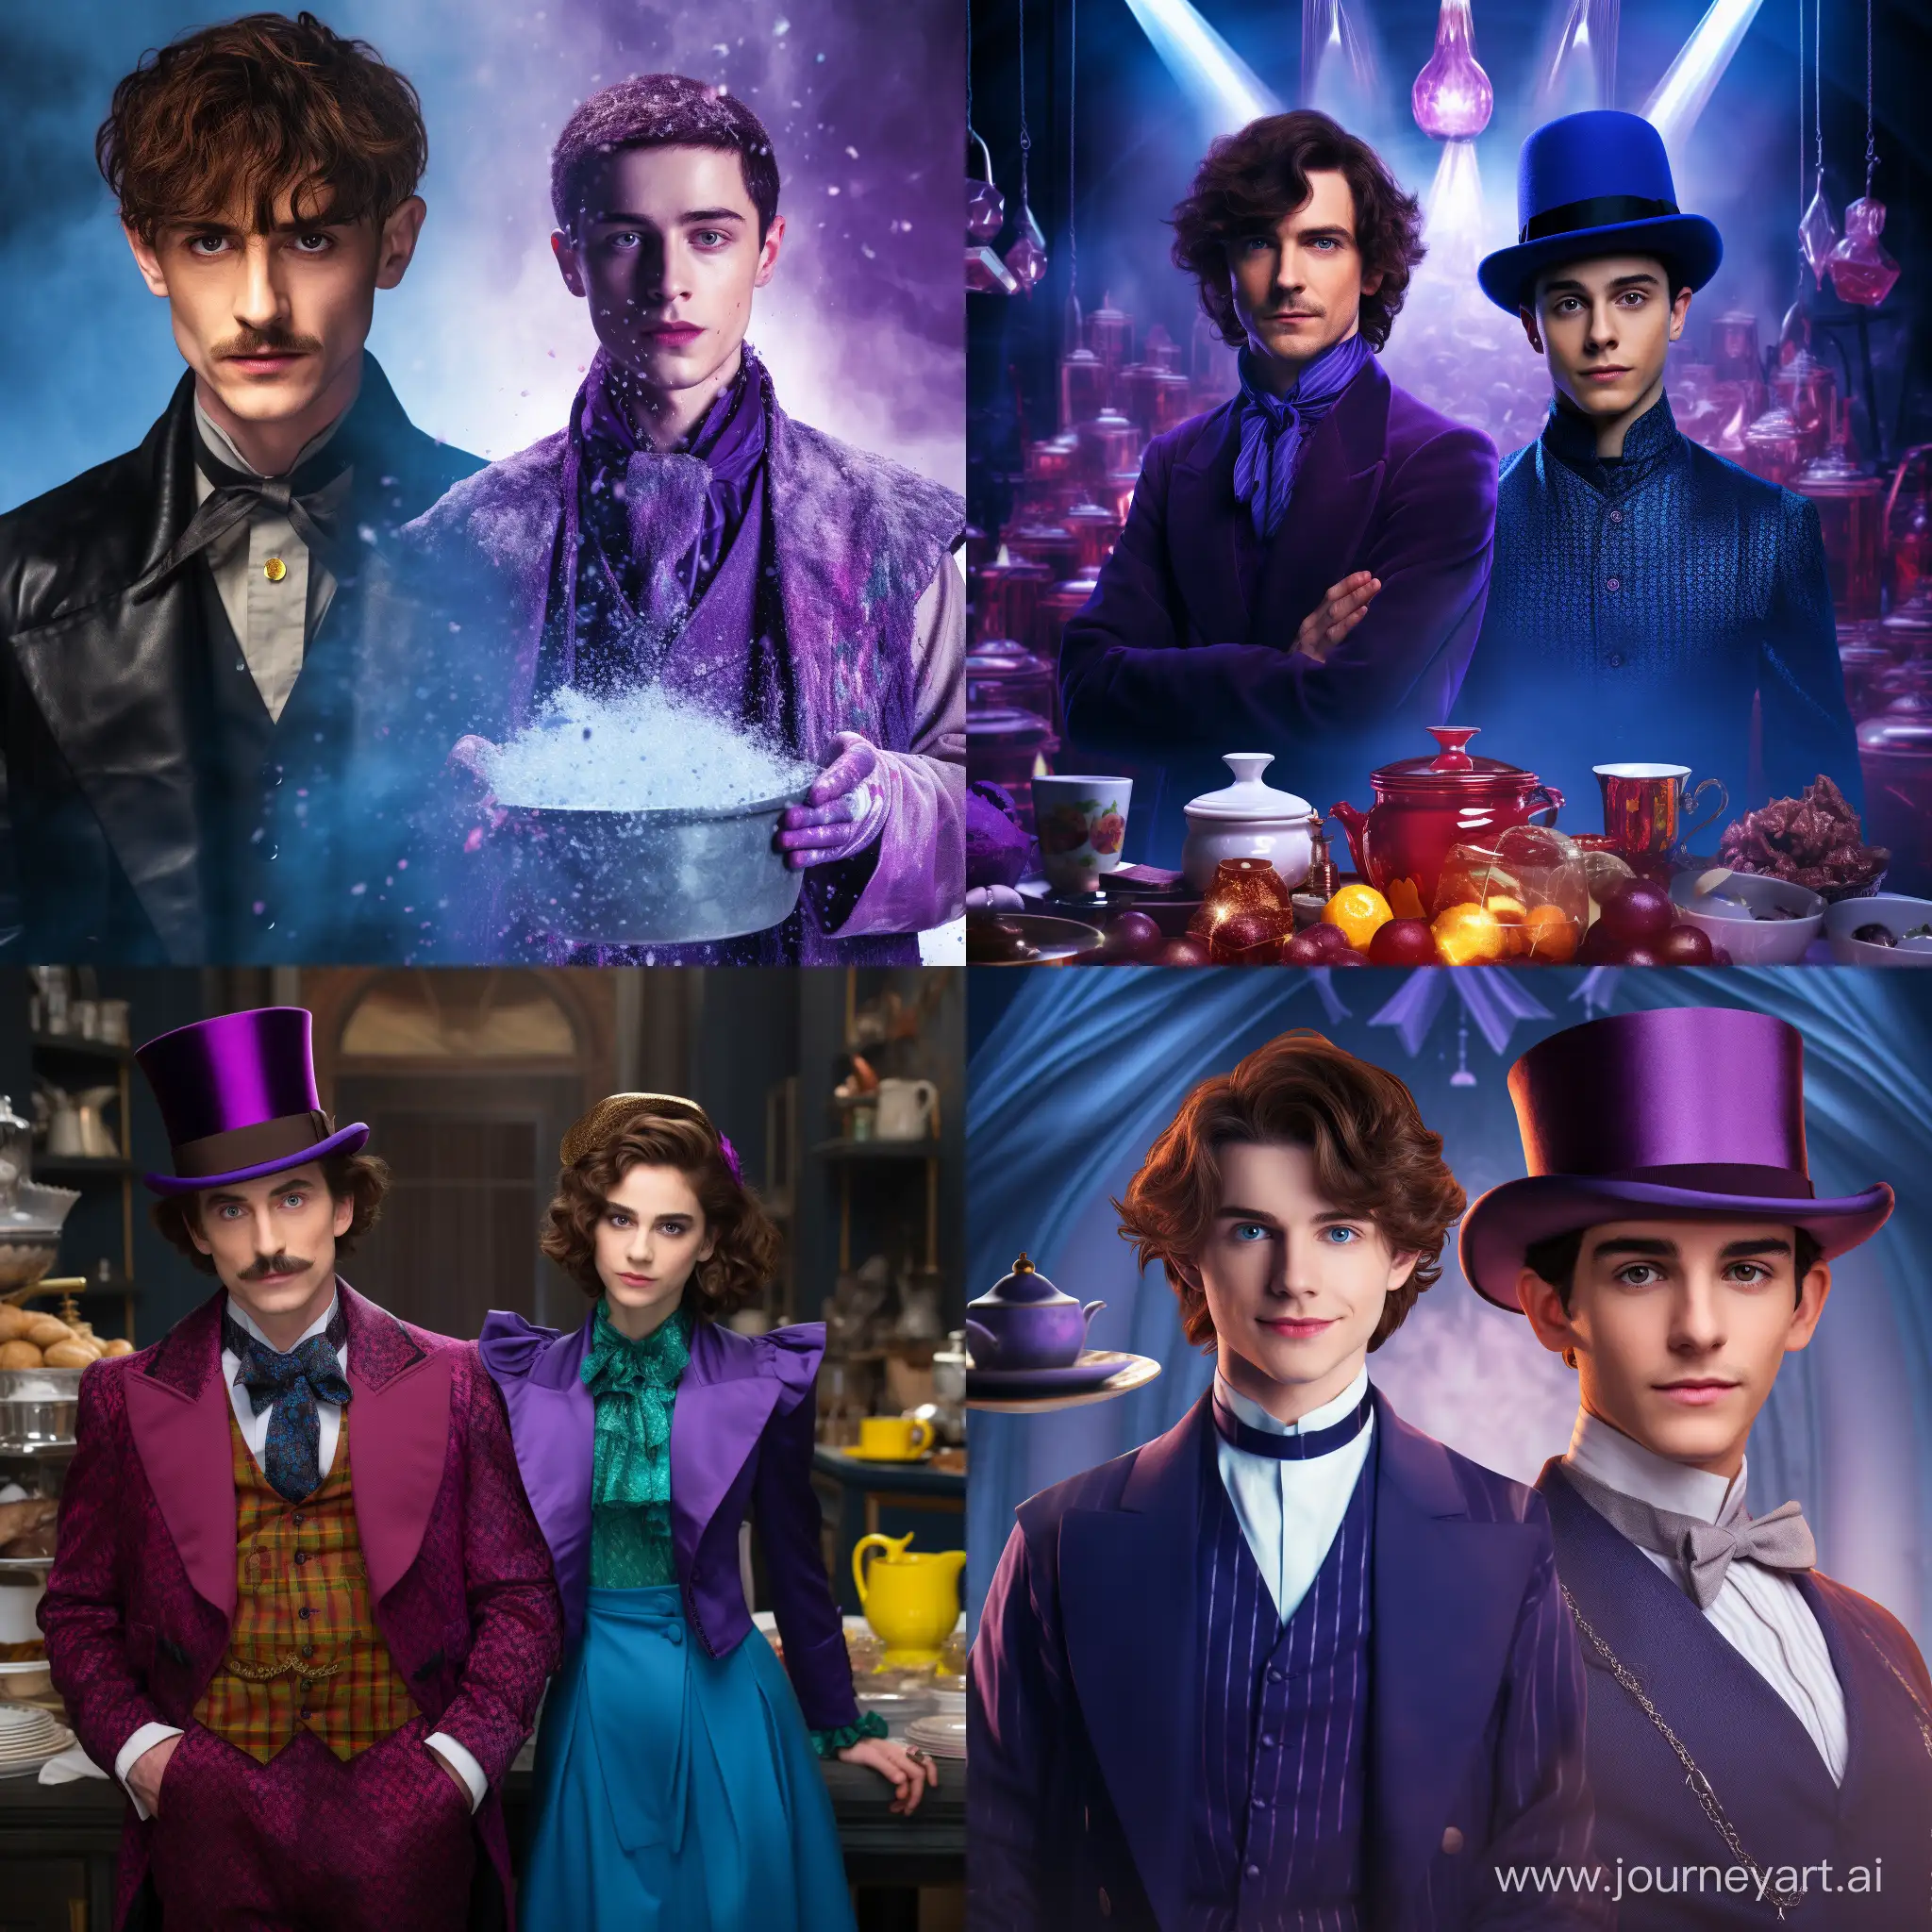 Timothée Hal Chalamet as Wonka and Bryan Lee Cranston as Heisenberg, they both are cooking "Blueberry Crystal Crunch"